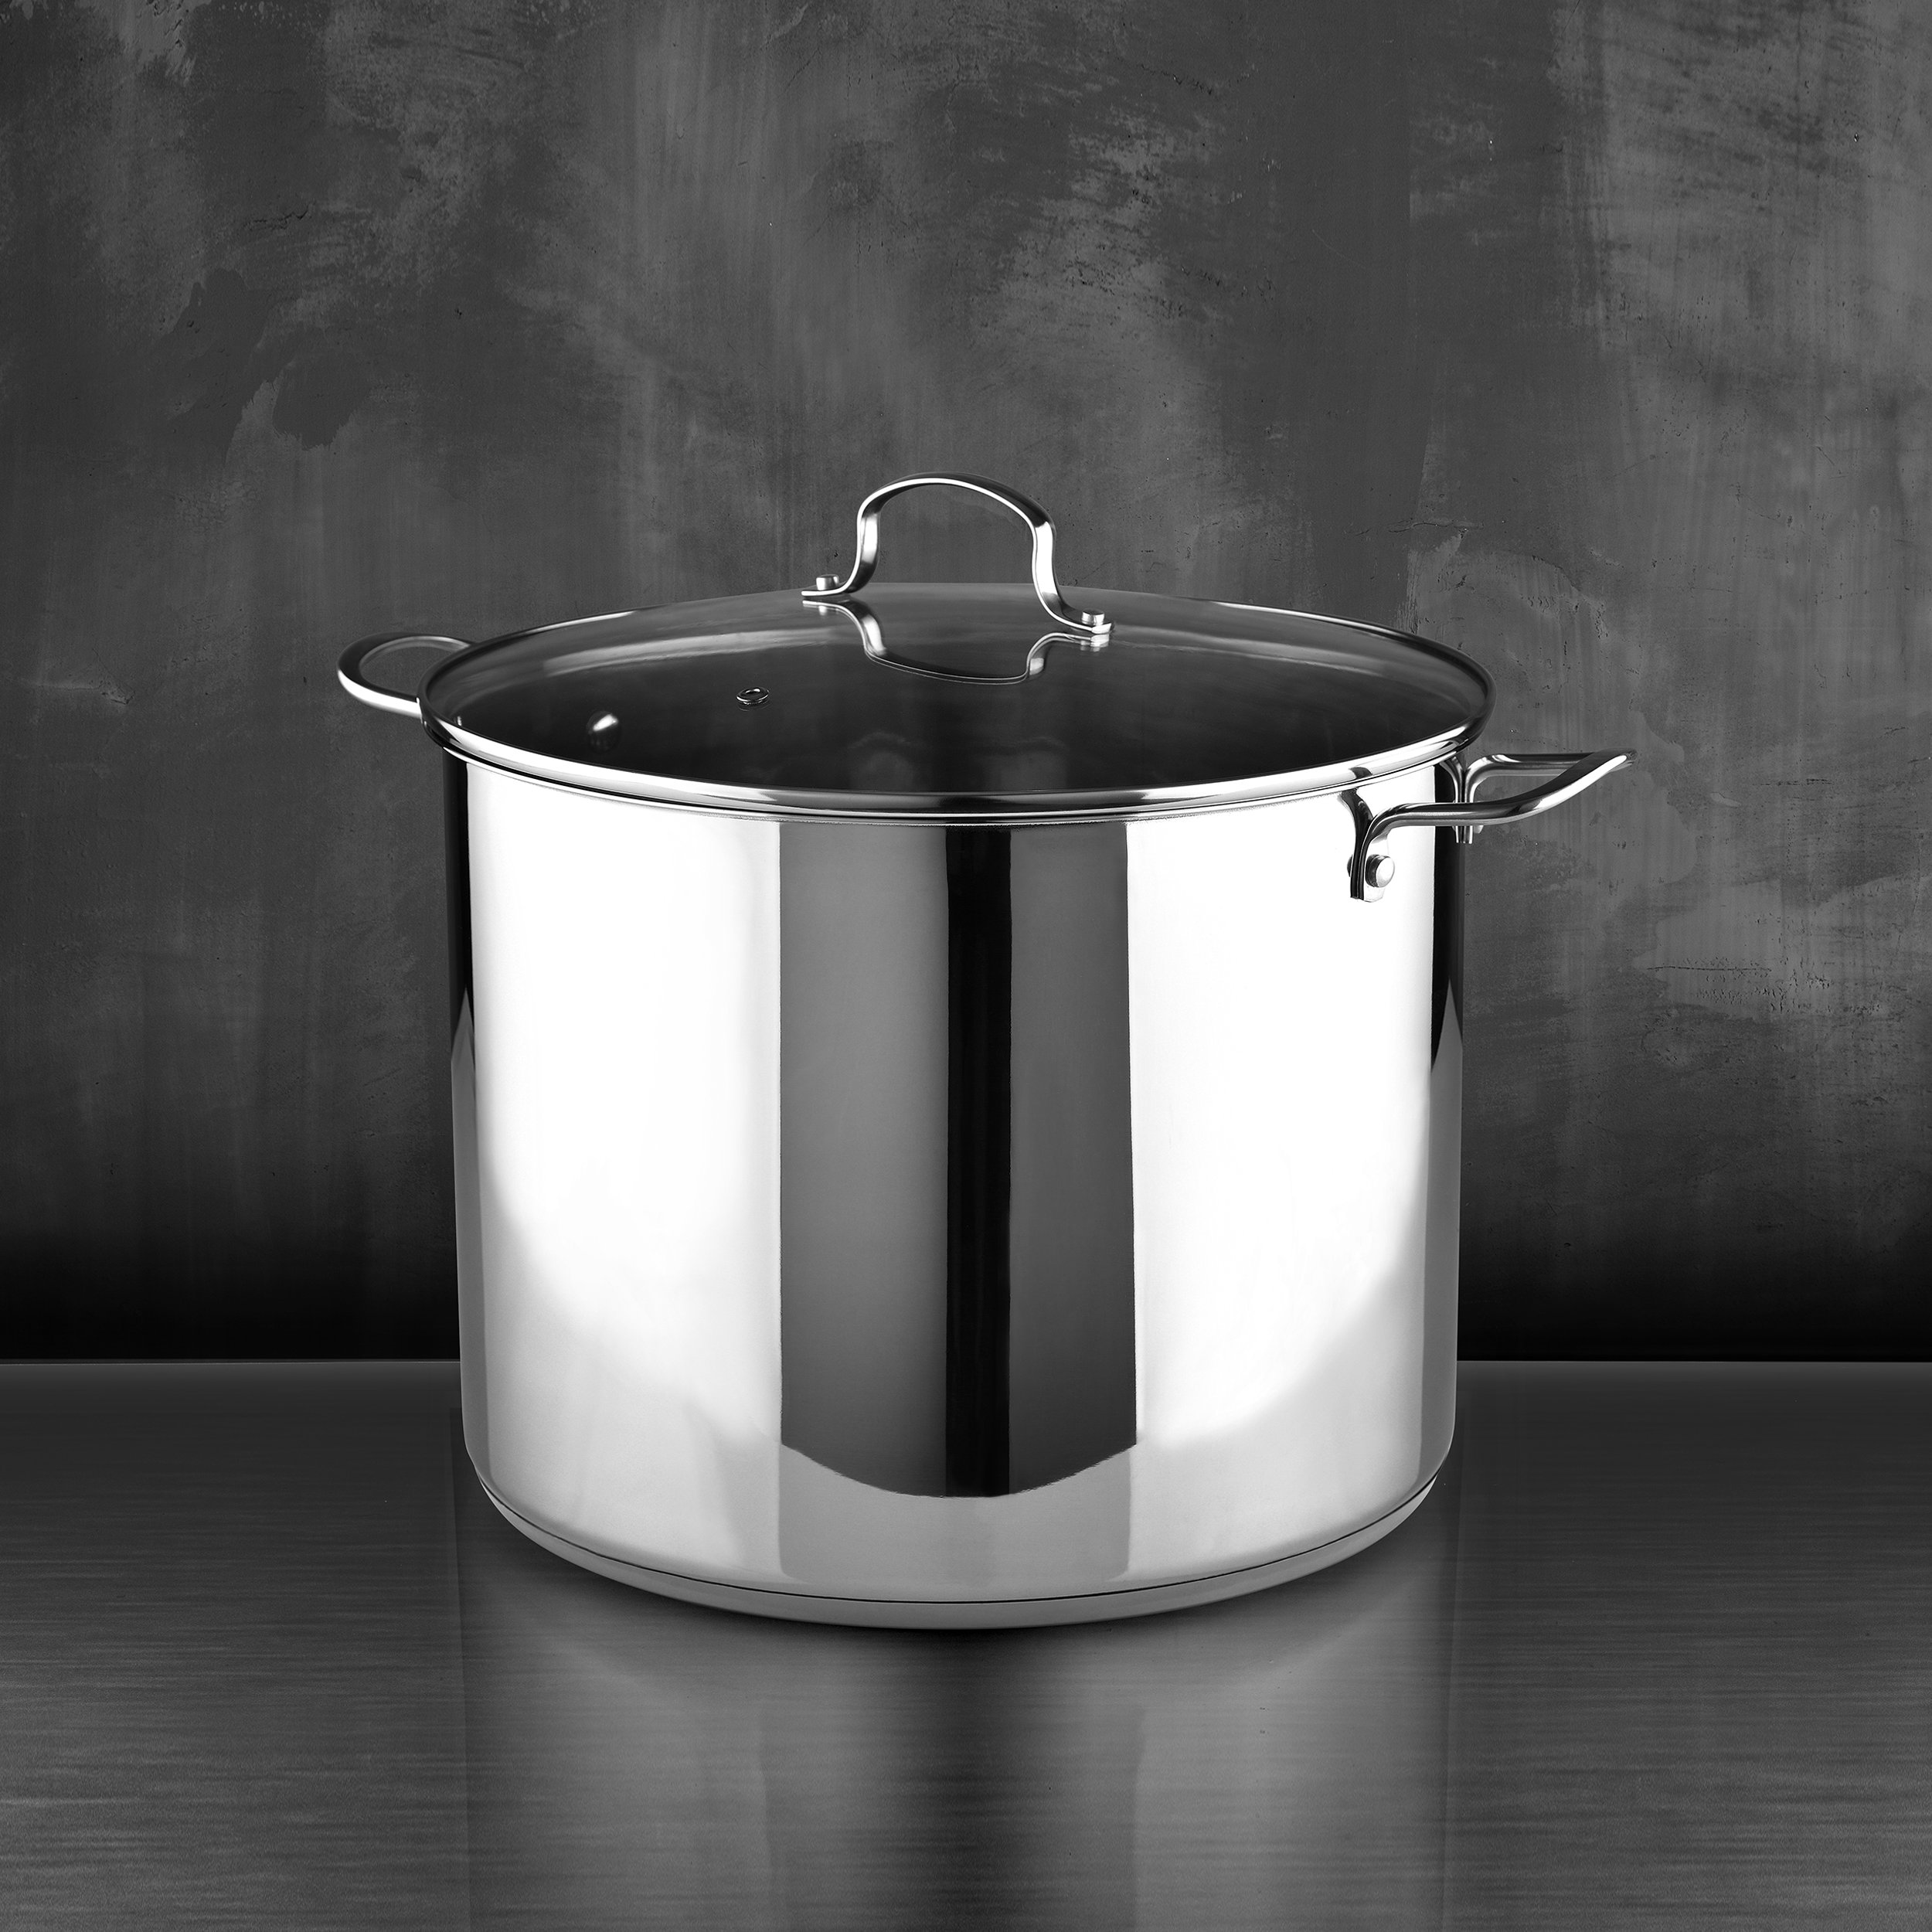 Gourmet by Bergner - 8 Qt Stainless Steel Dutch Oven with Vented Glass Lid,  8 Quarts, Polished